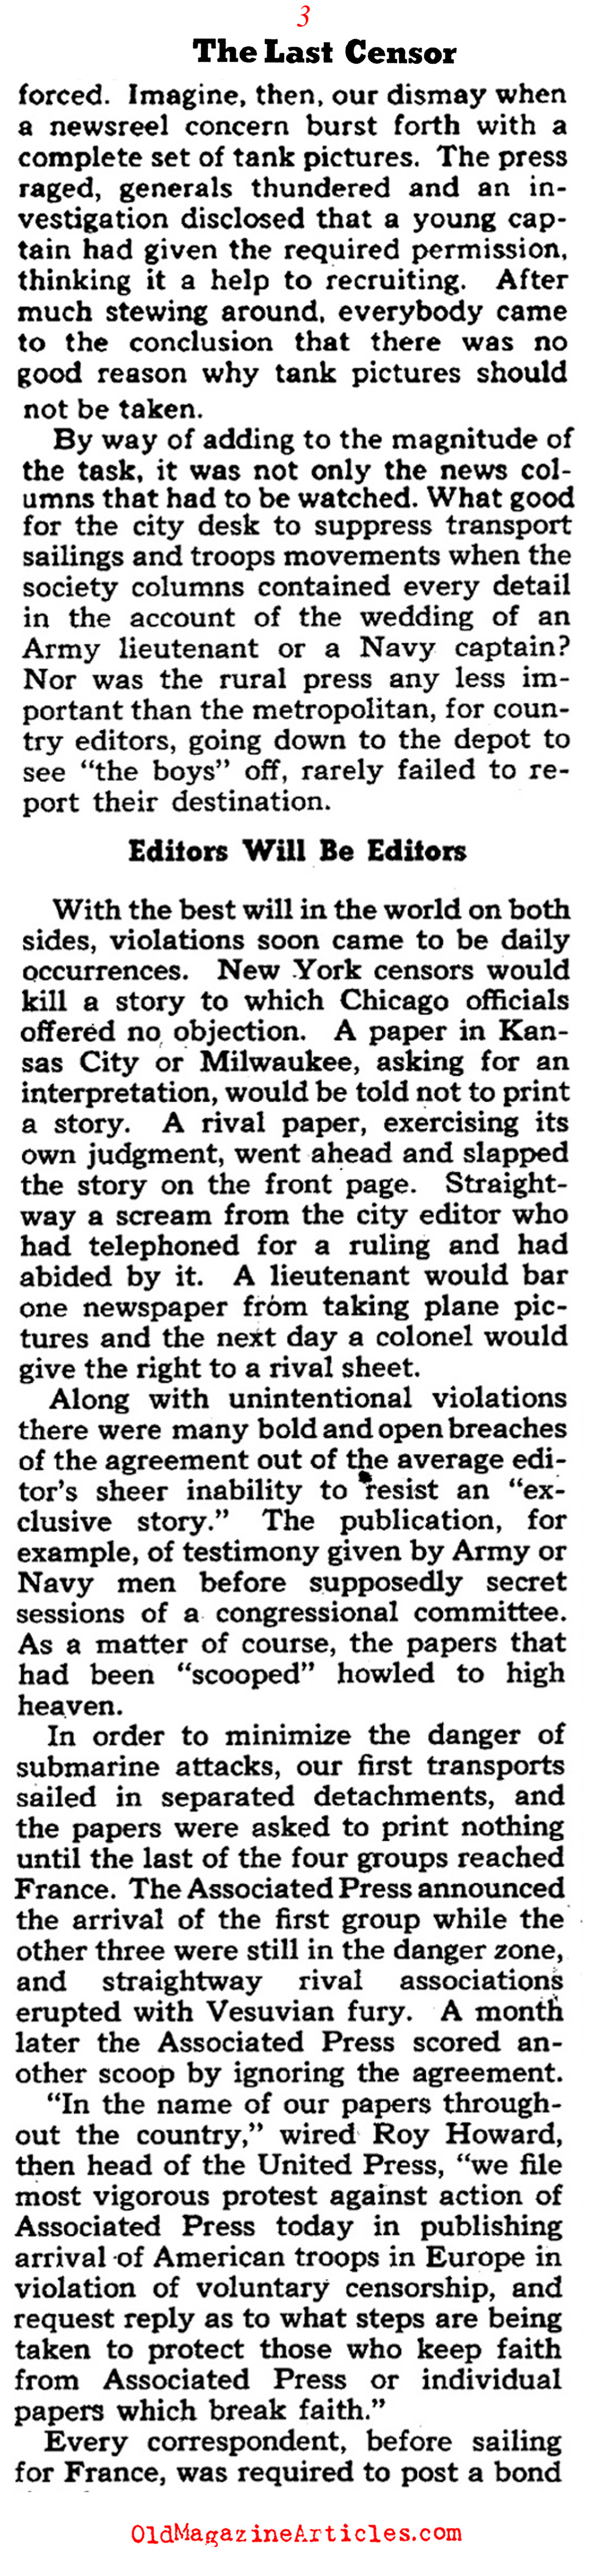 The Failures of W.W. I American Press Censorship (Collier's Magazine, 1941)